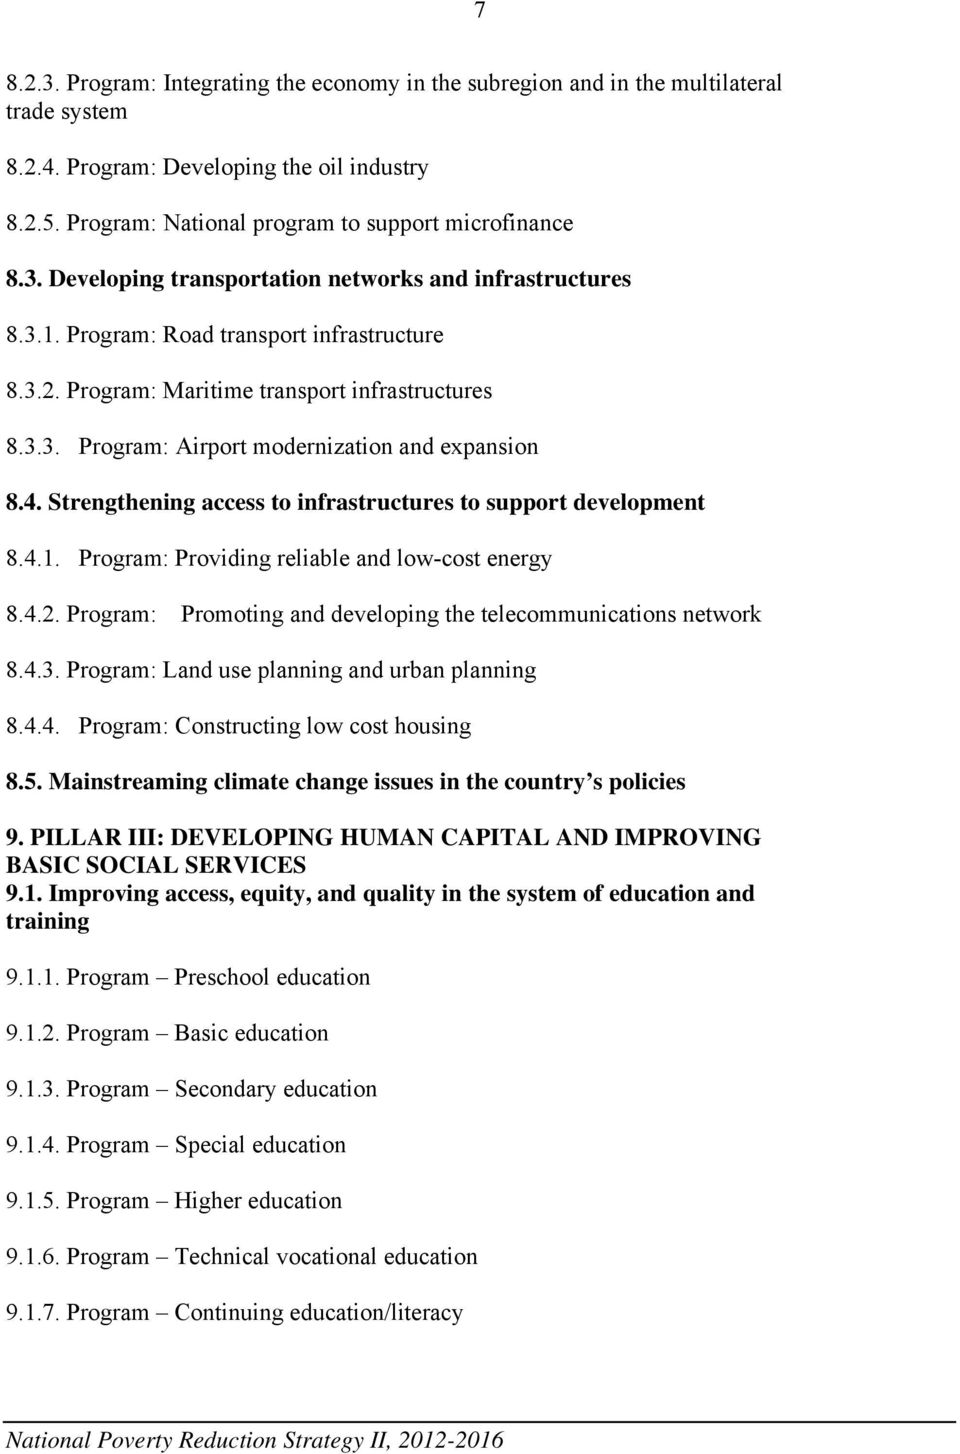 4. Strengthening access to infrastructures to support development 8.4.1. Program: Providing reliable and low-cost energy 8.4.2. Program: Promoting and developing the telecommunications network 8.4.3.